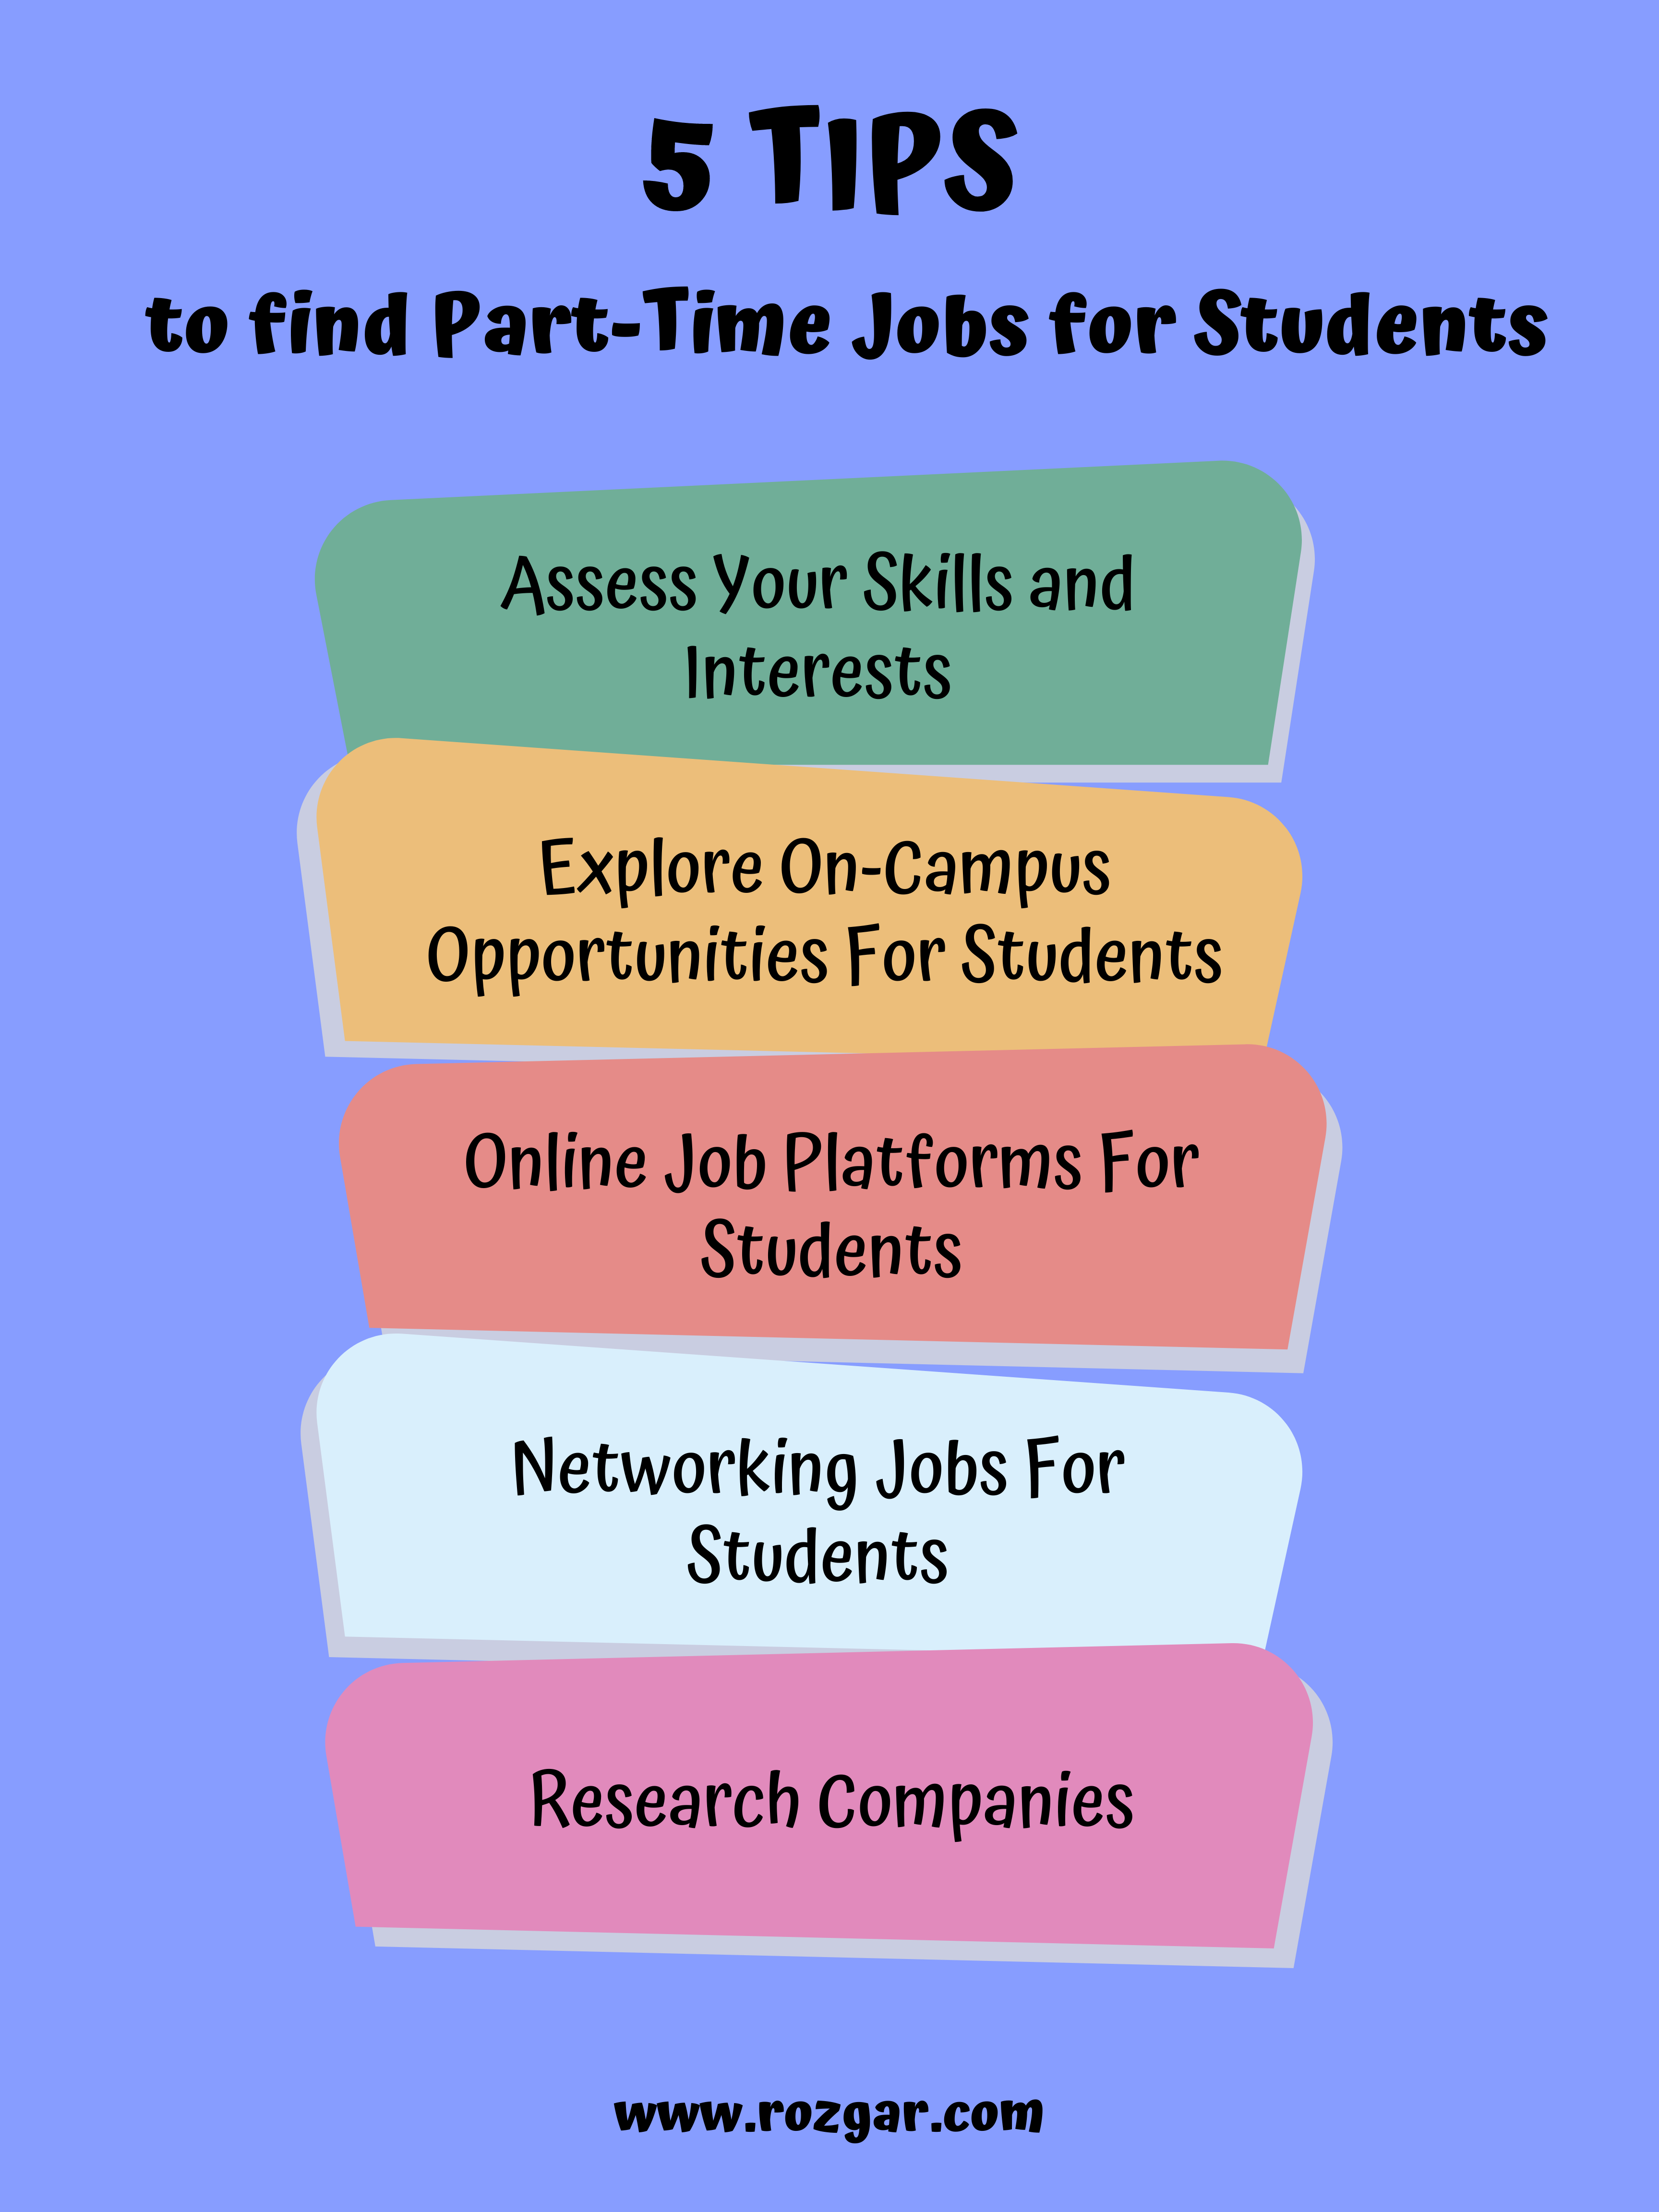 Tips to Find Part-Time Jobs for Students